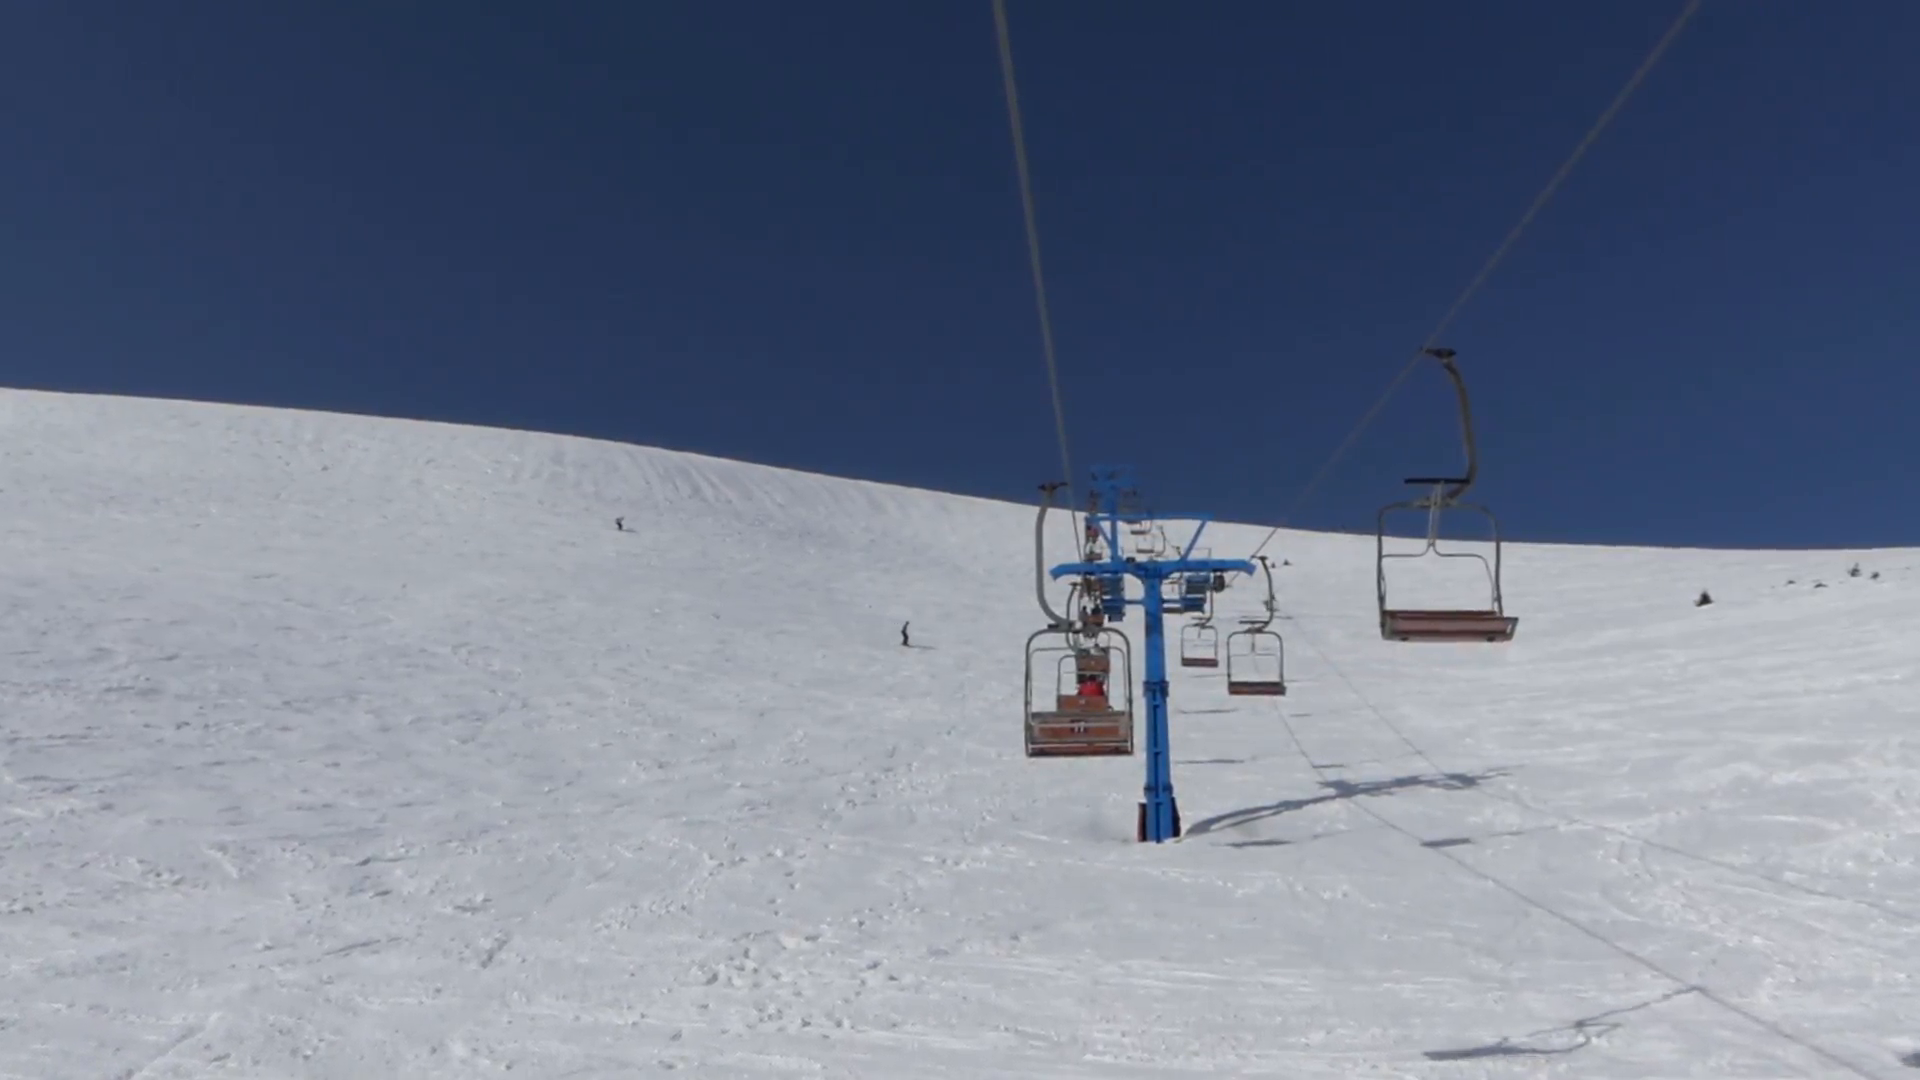 Empty seats of the chair lift go down from the top of mountain. The ...